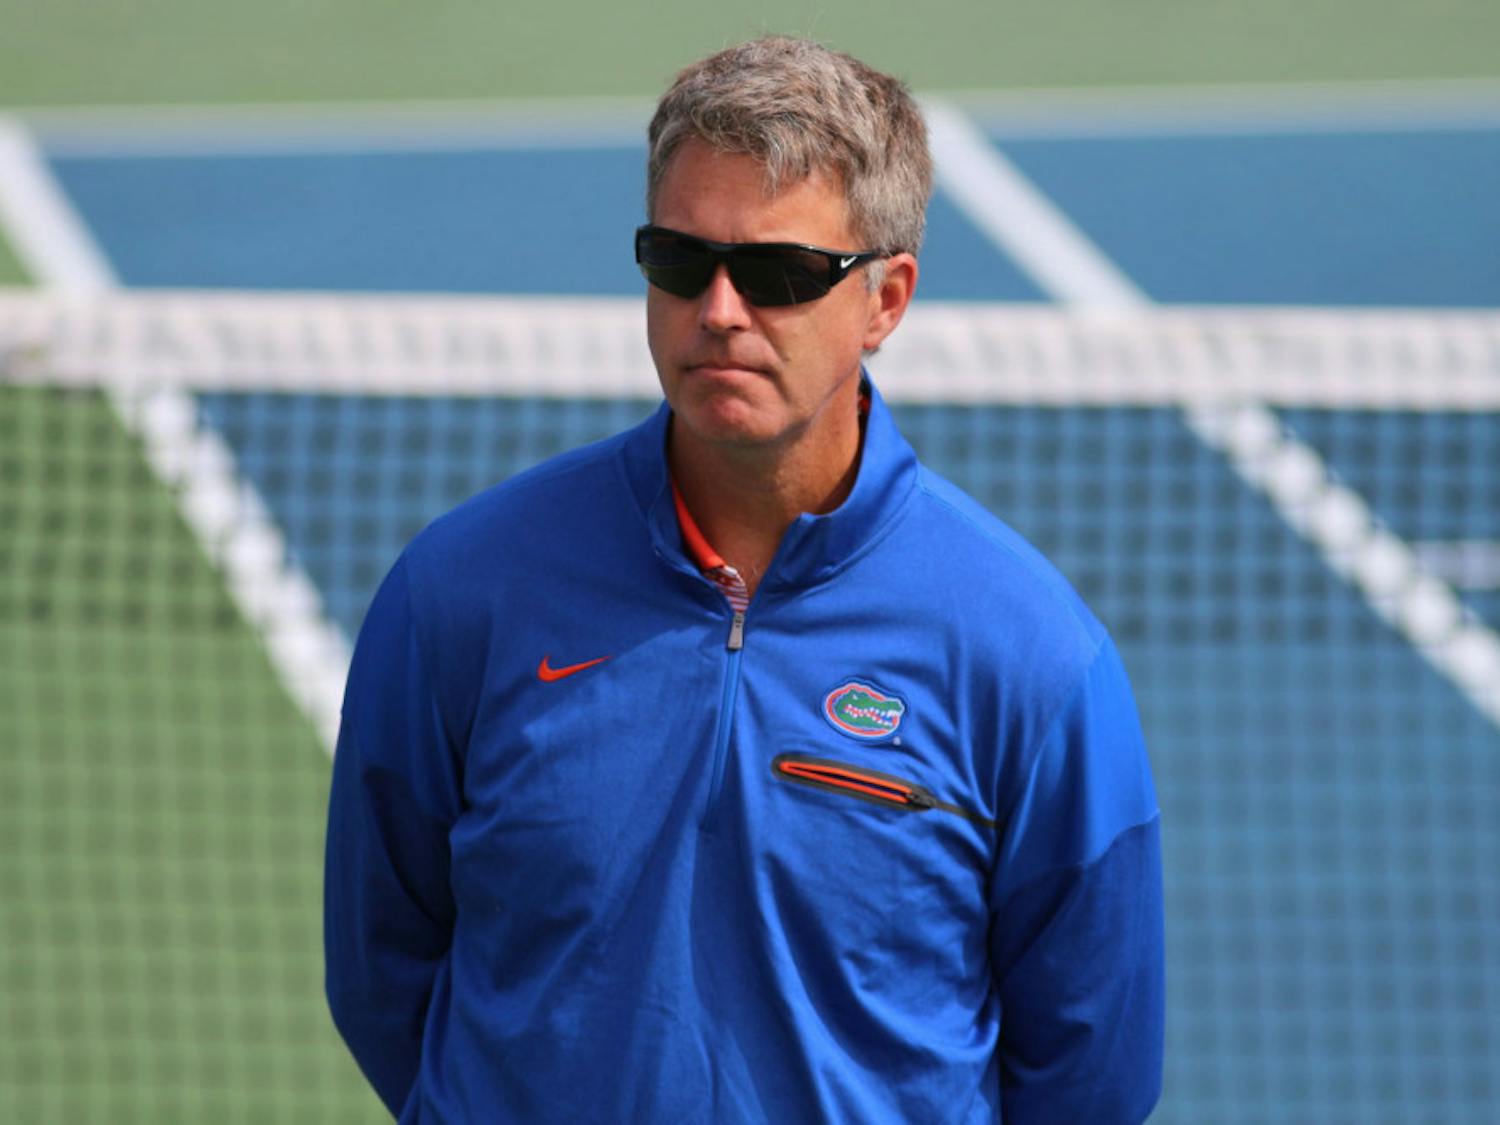 Florida coach Roland Thornqvist and the Gators are ranked No. 11 heading into the spring despite being mostly composed of freshmen and sophomores.
&nbsp;